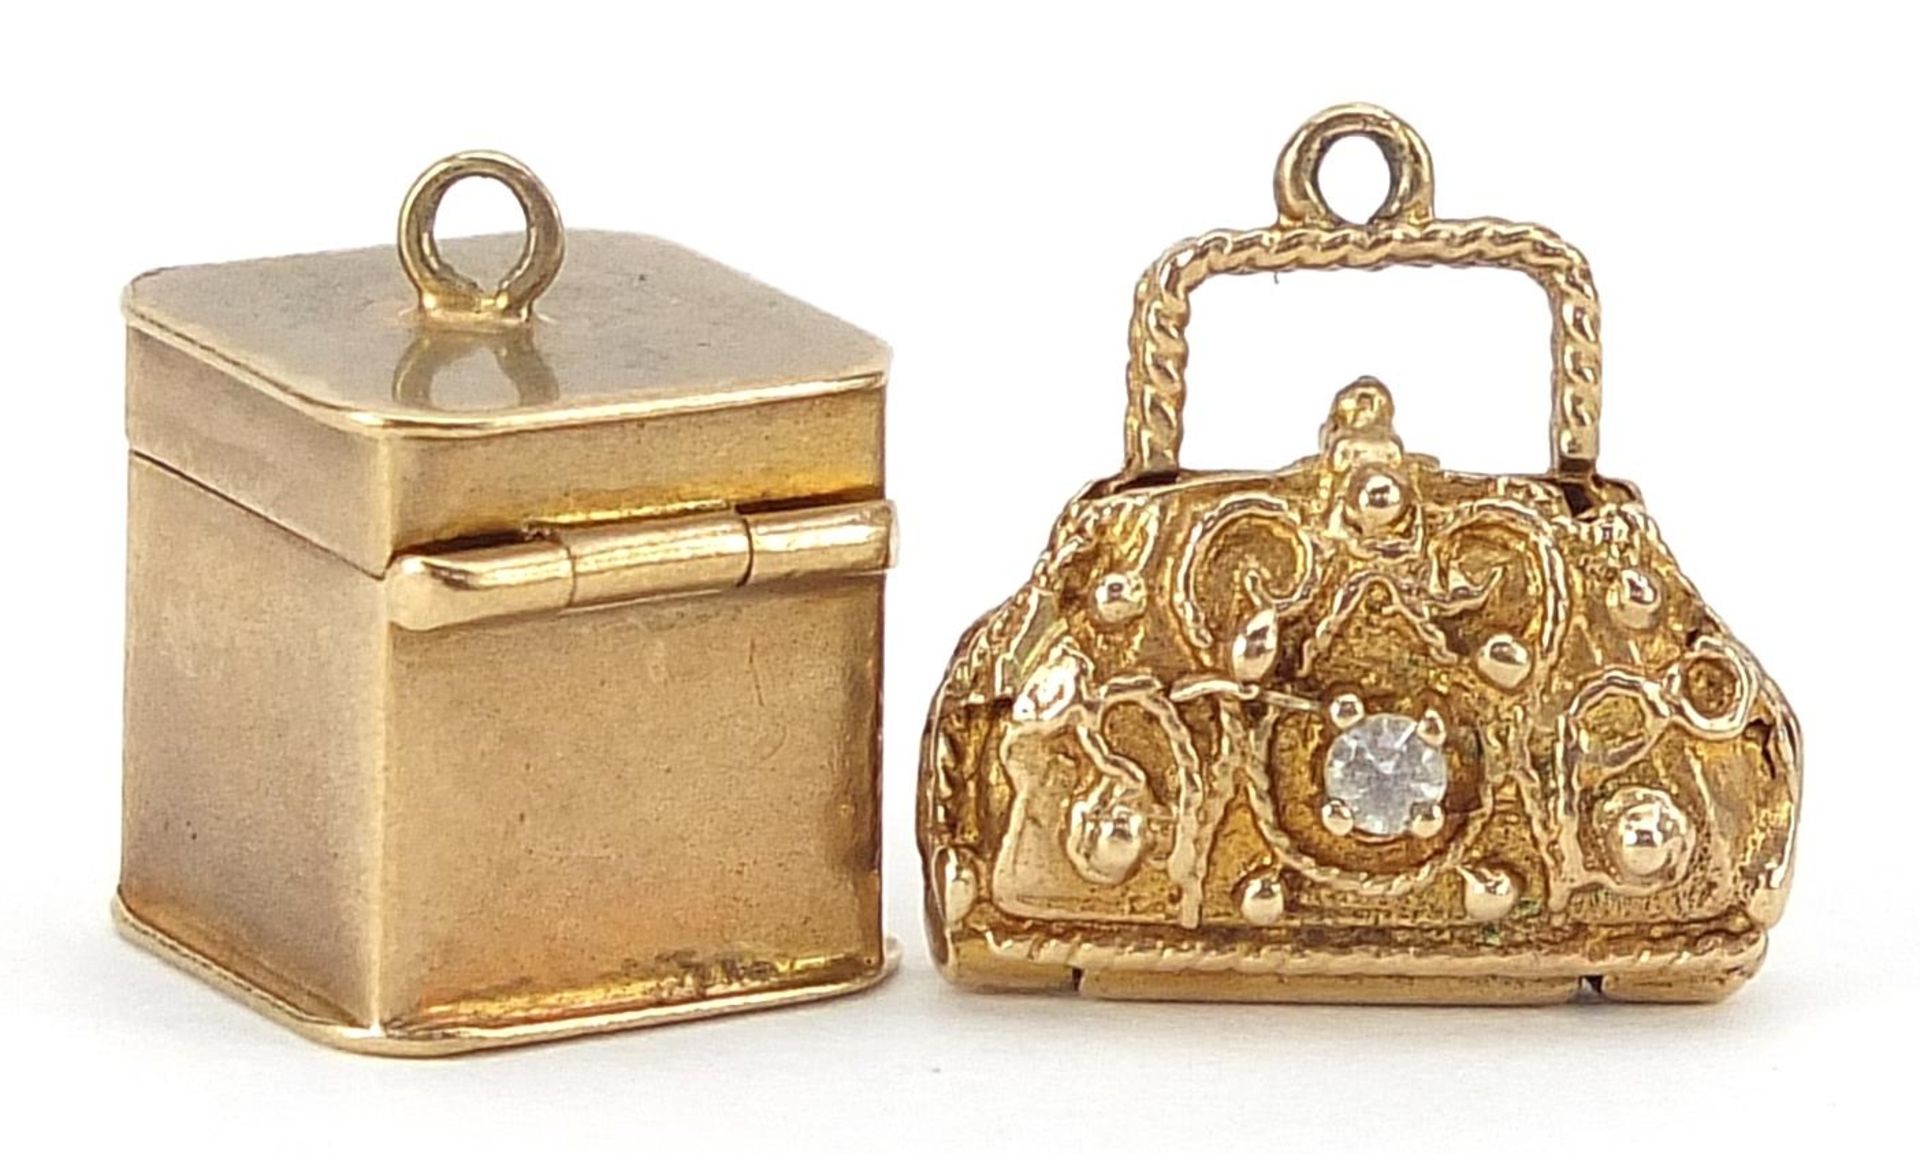 9ct gold first aid box charm and unmarked gold handbag charm set with a white sapphire and ruby, the - Image 2 of 3